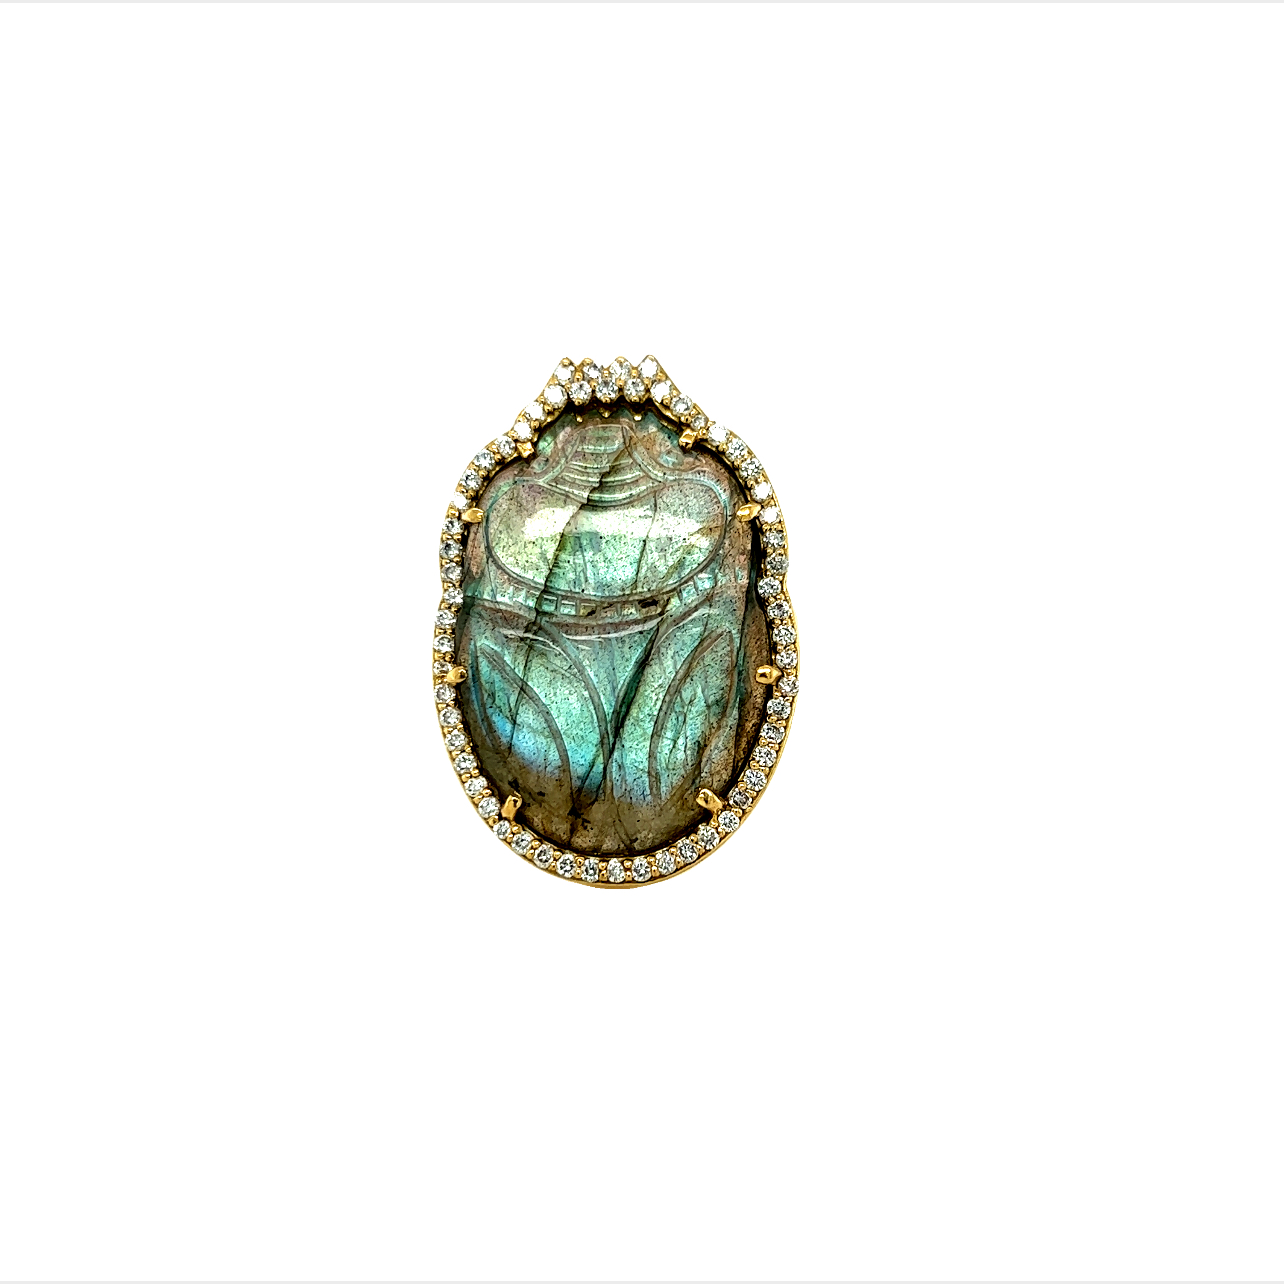 Featured image for “Exquisite Labradorite Scarab Ring”